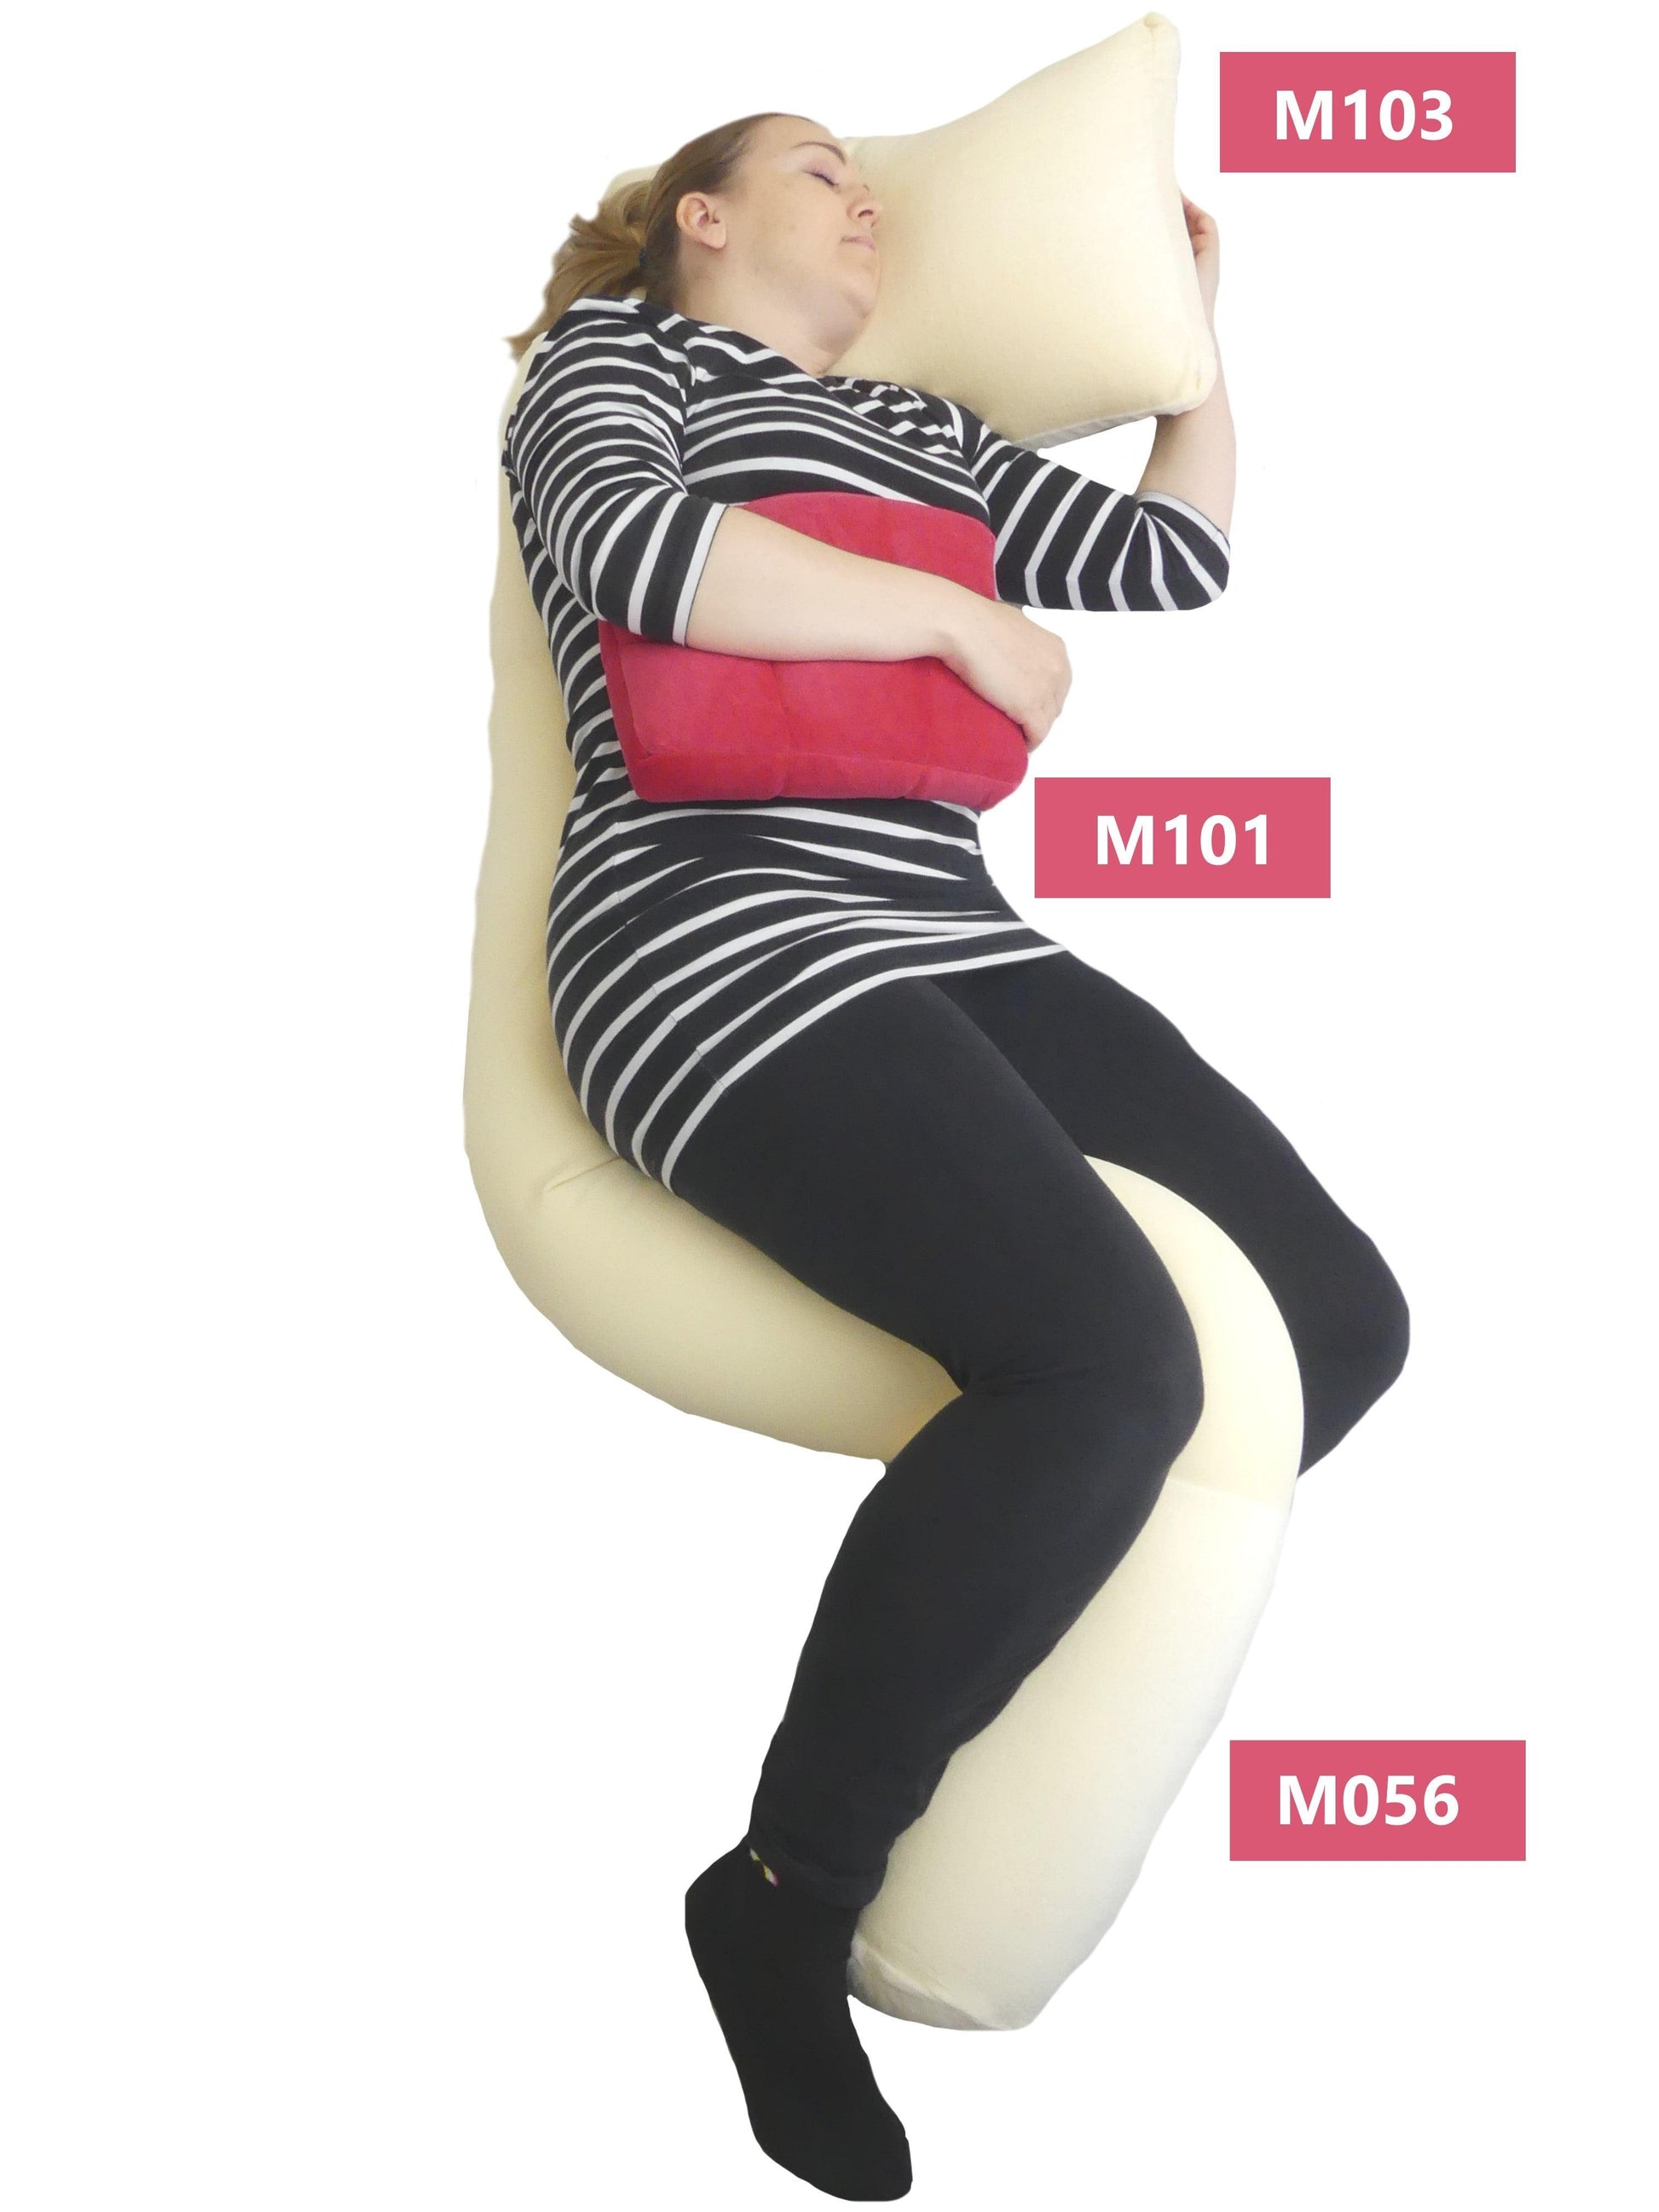 Positioning and Pressure Care: Support Cushion/Knee and Ankle Separator - M101 - MEDORIS